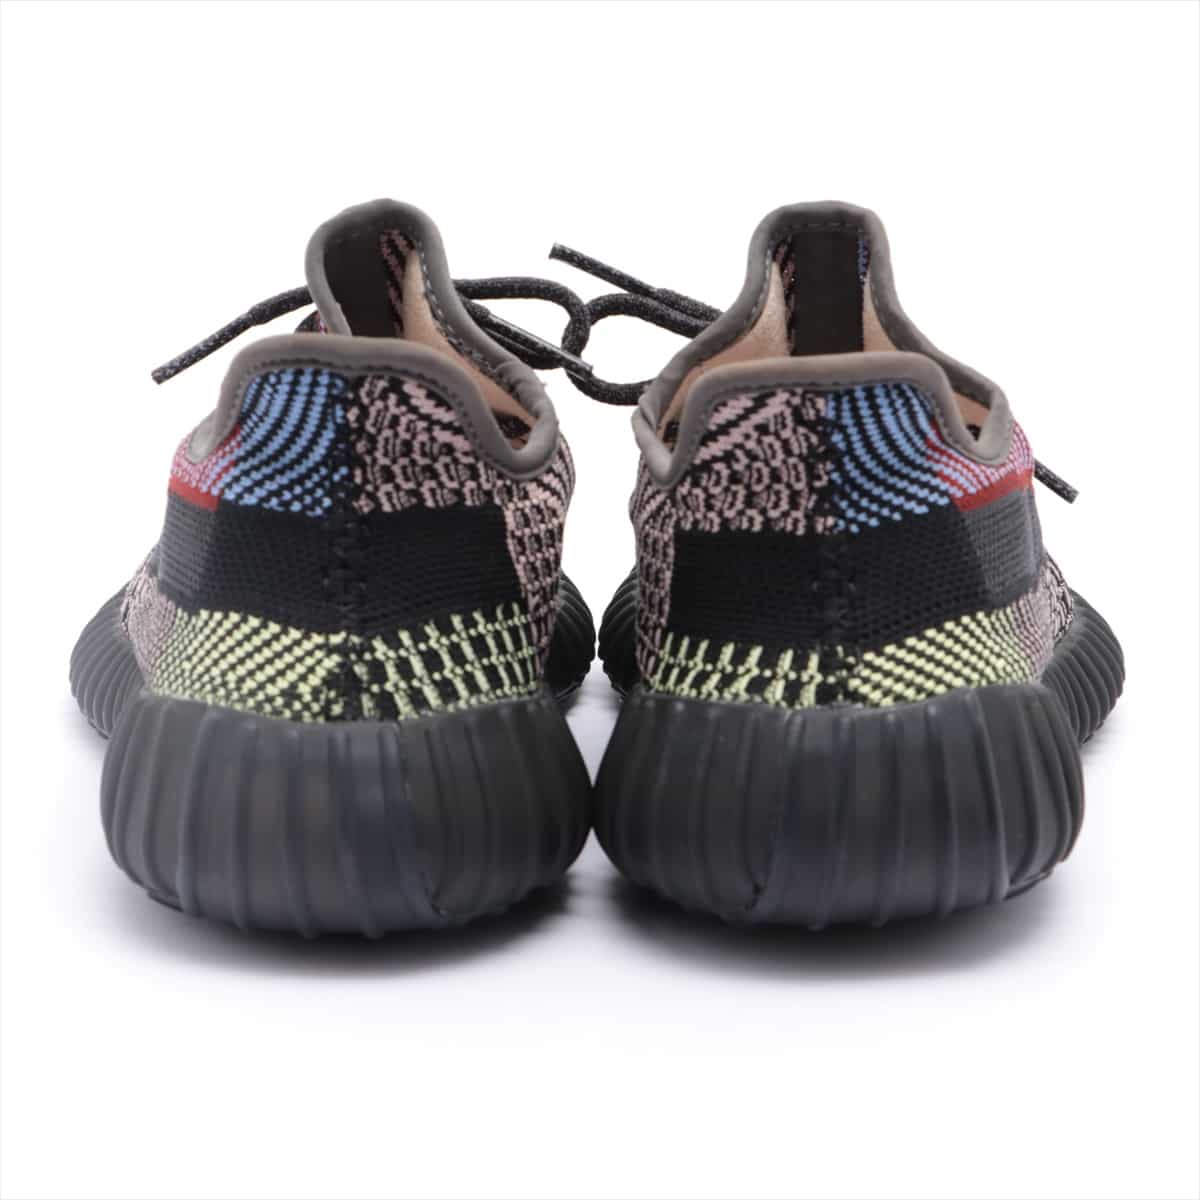 Adidas YEEZY BOOST 350 V2 Knit Sneakers 25.5cm Men's Multicolor FW5190